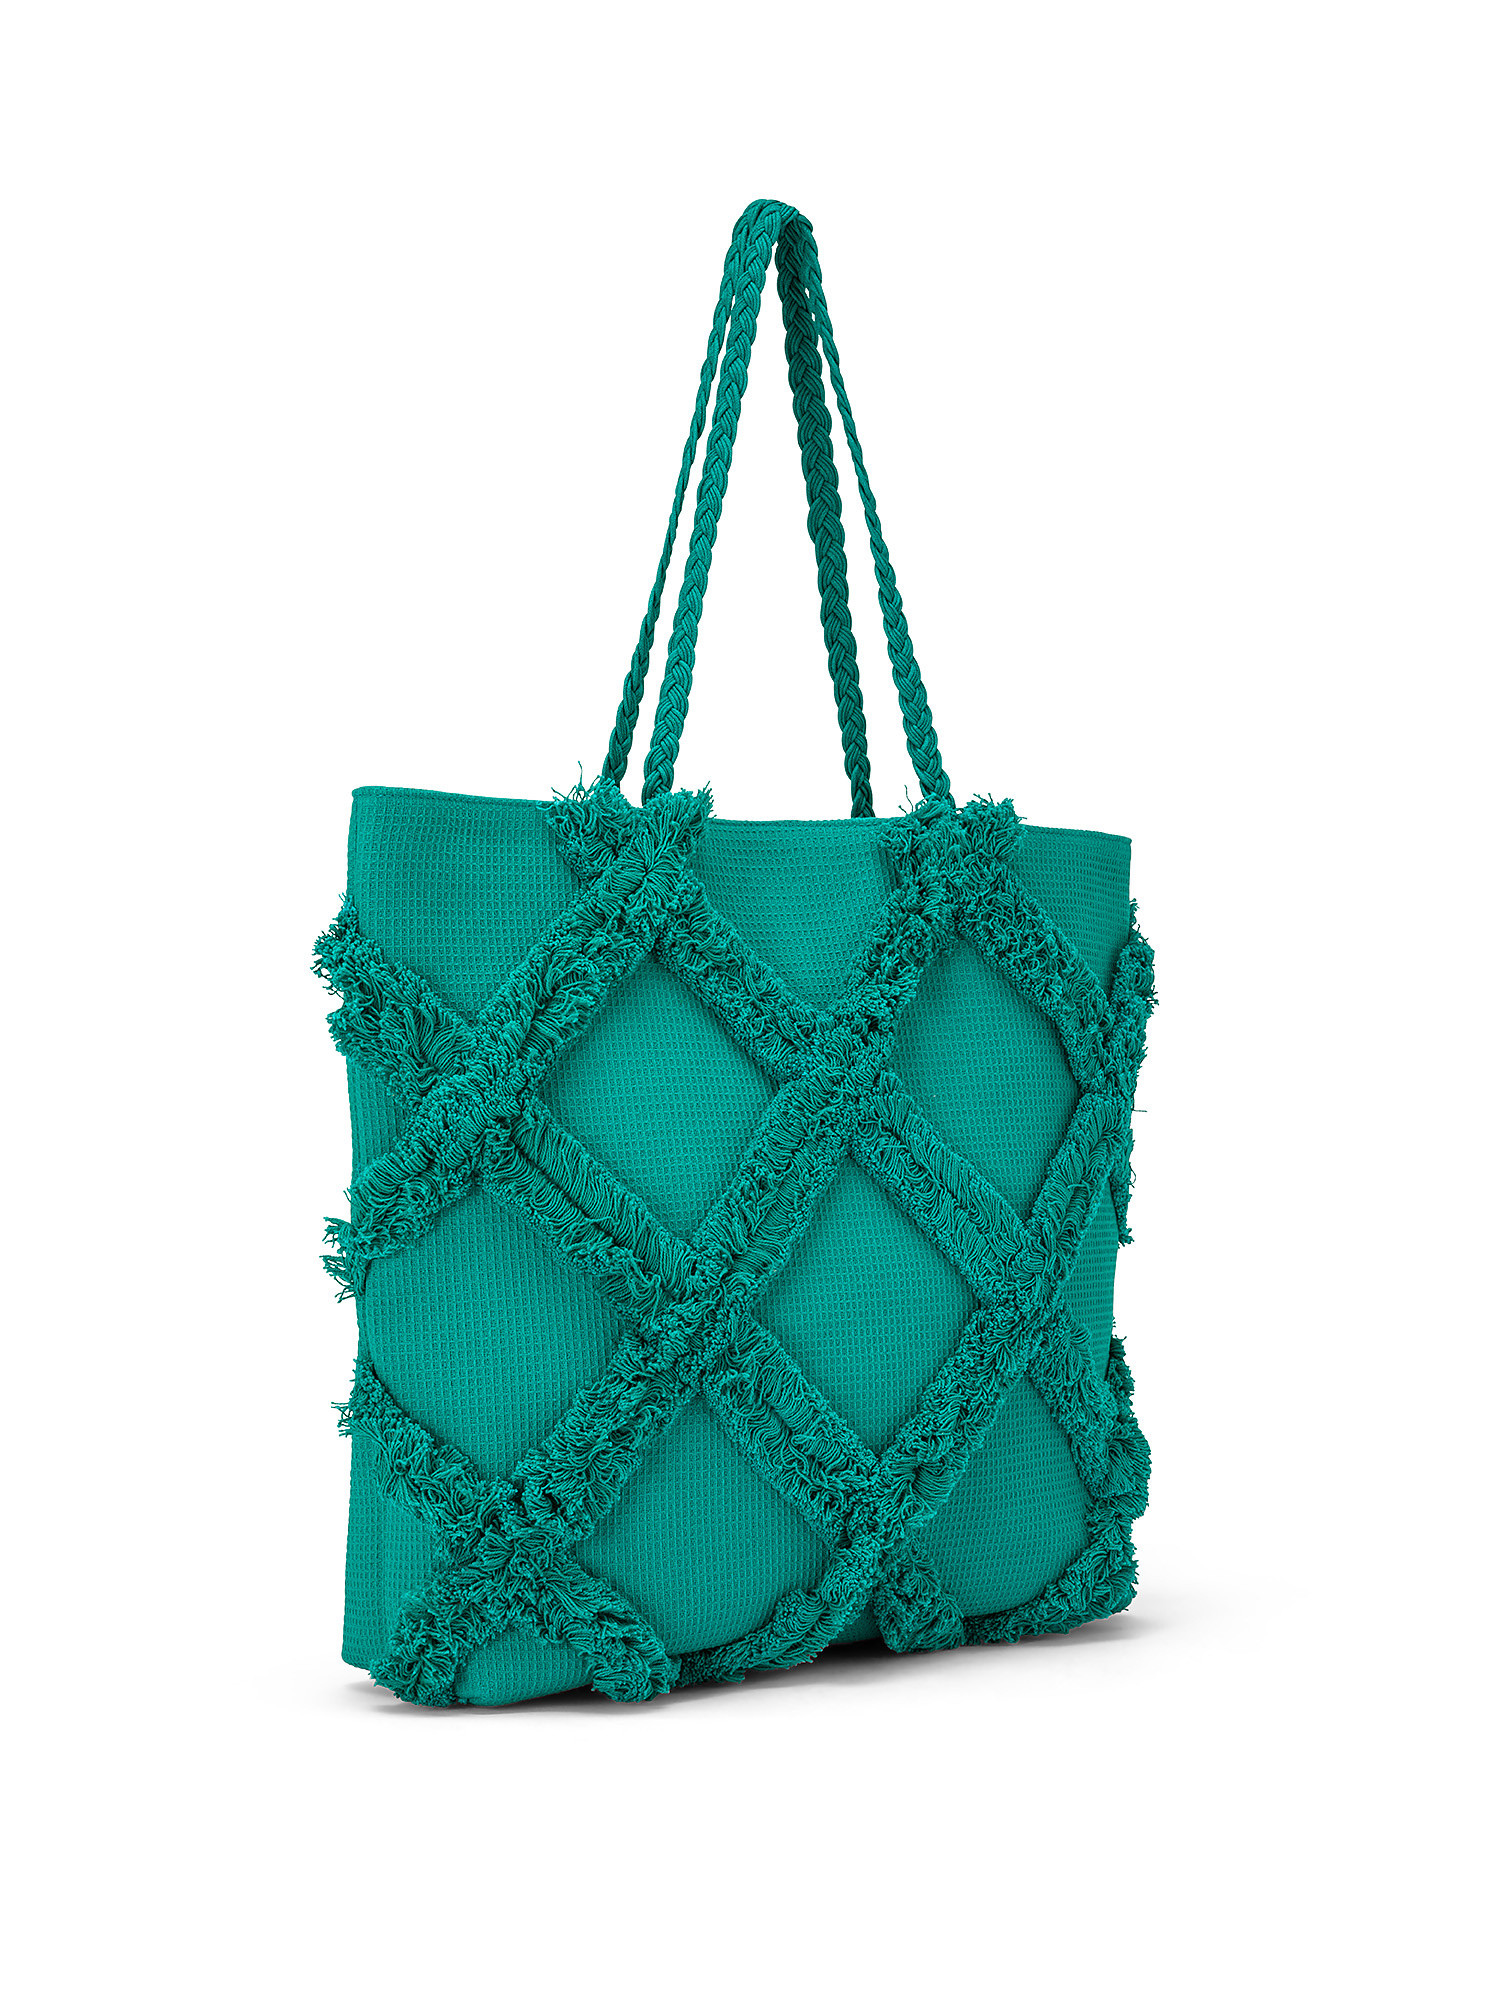 Shopping bag in cotone, Azzurro turchese, large image number 1